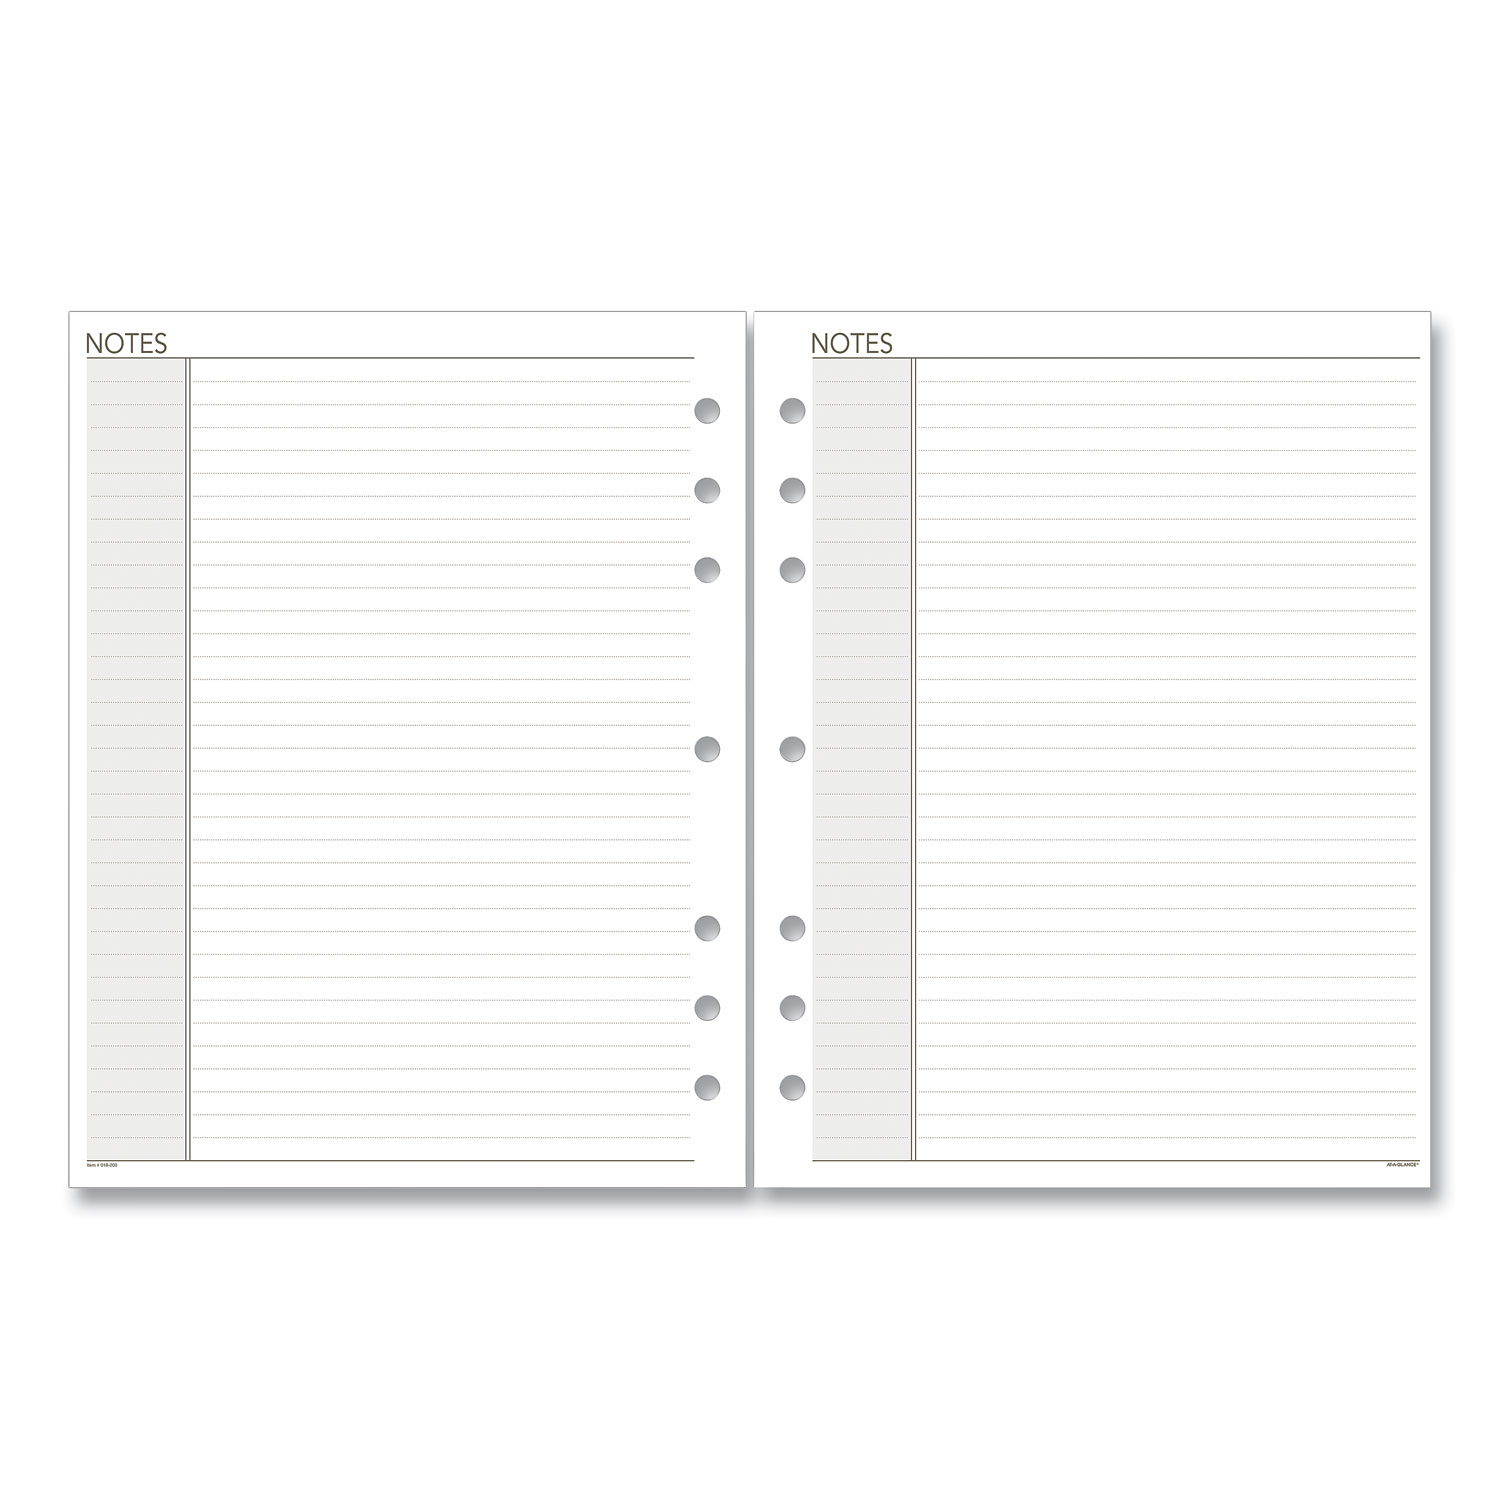  AT-A-GLANCE 011200 Lined Notes Pages, 8.5 x 5.5, White, 30/Pack (AAG011200) 